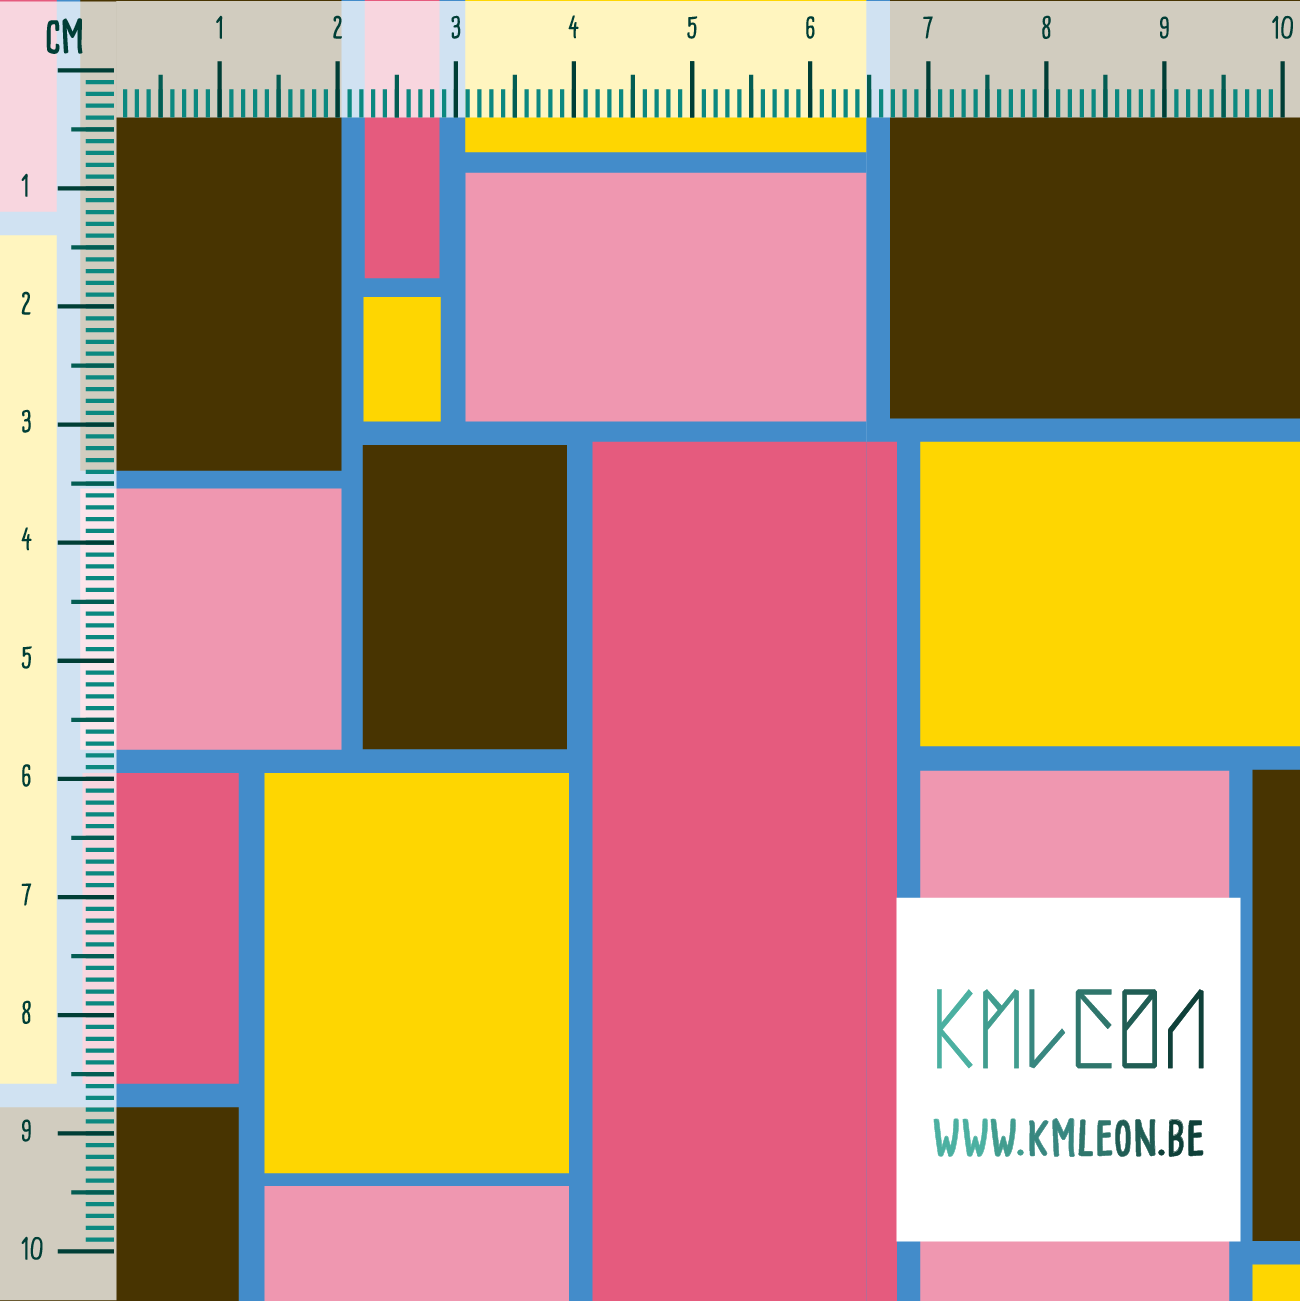 Pink, yellow and brown rectangles fabric